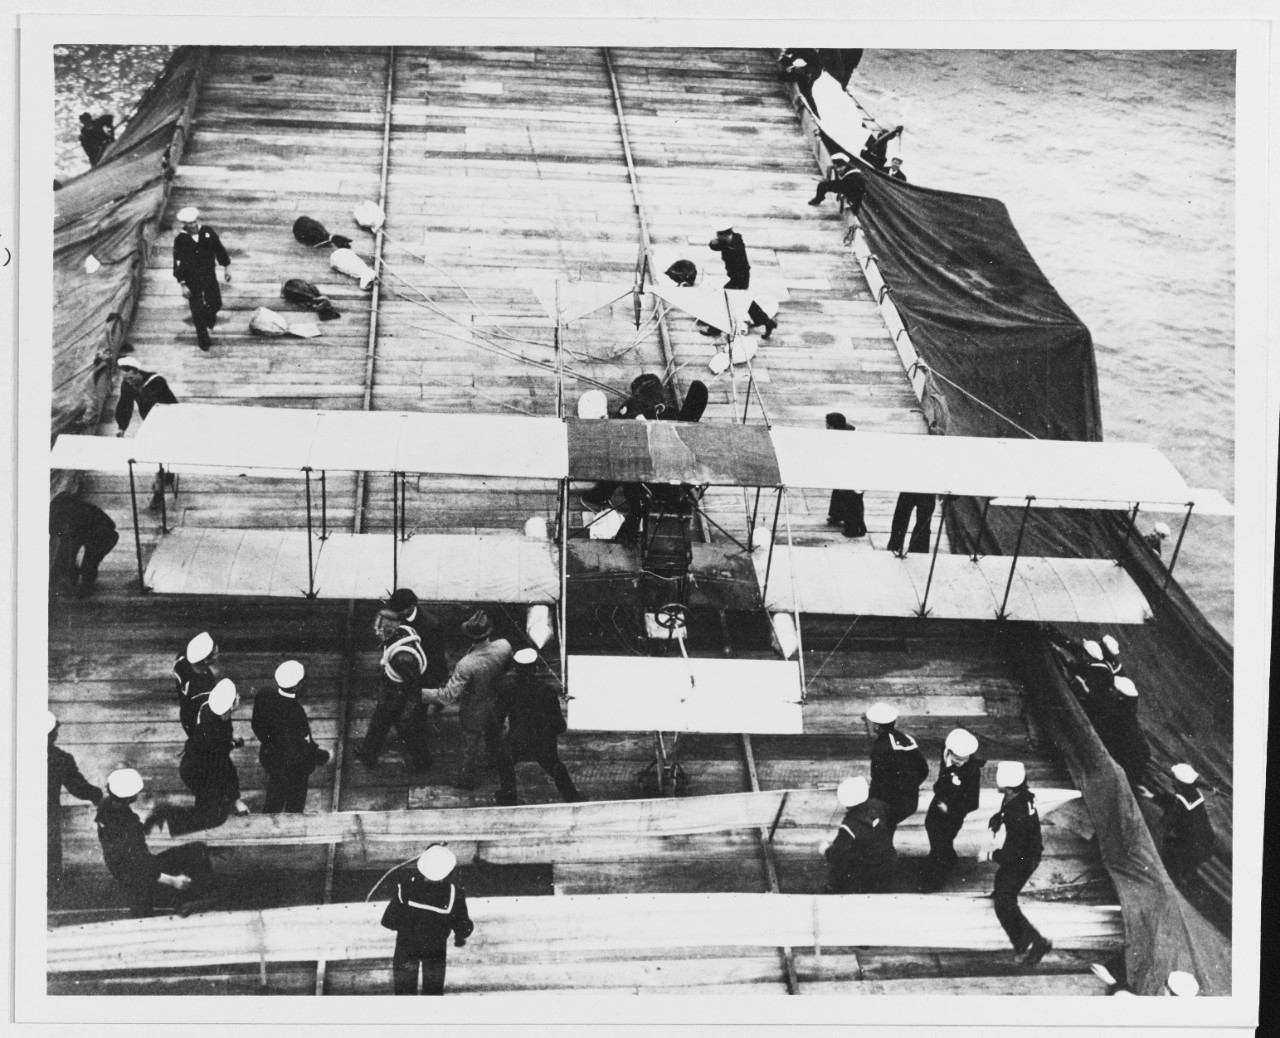 Photo #: NH 77502  First airplane landing on a warship, 18 January 1911